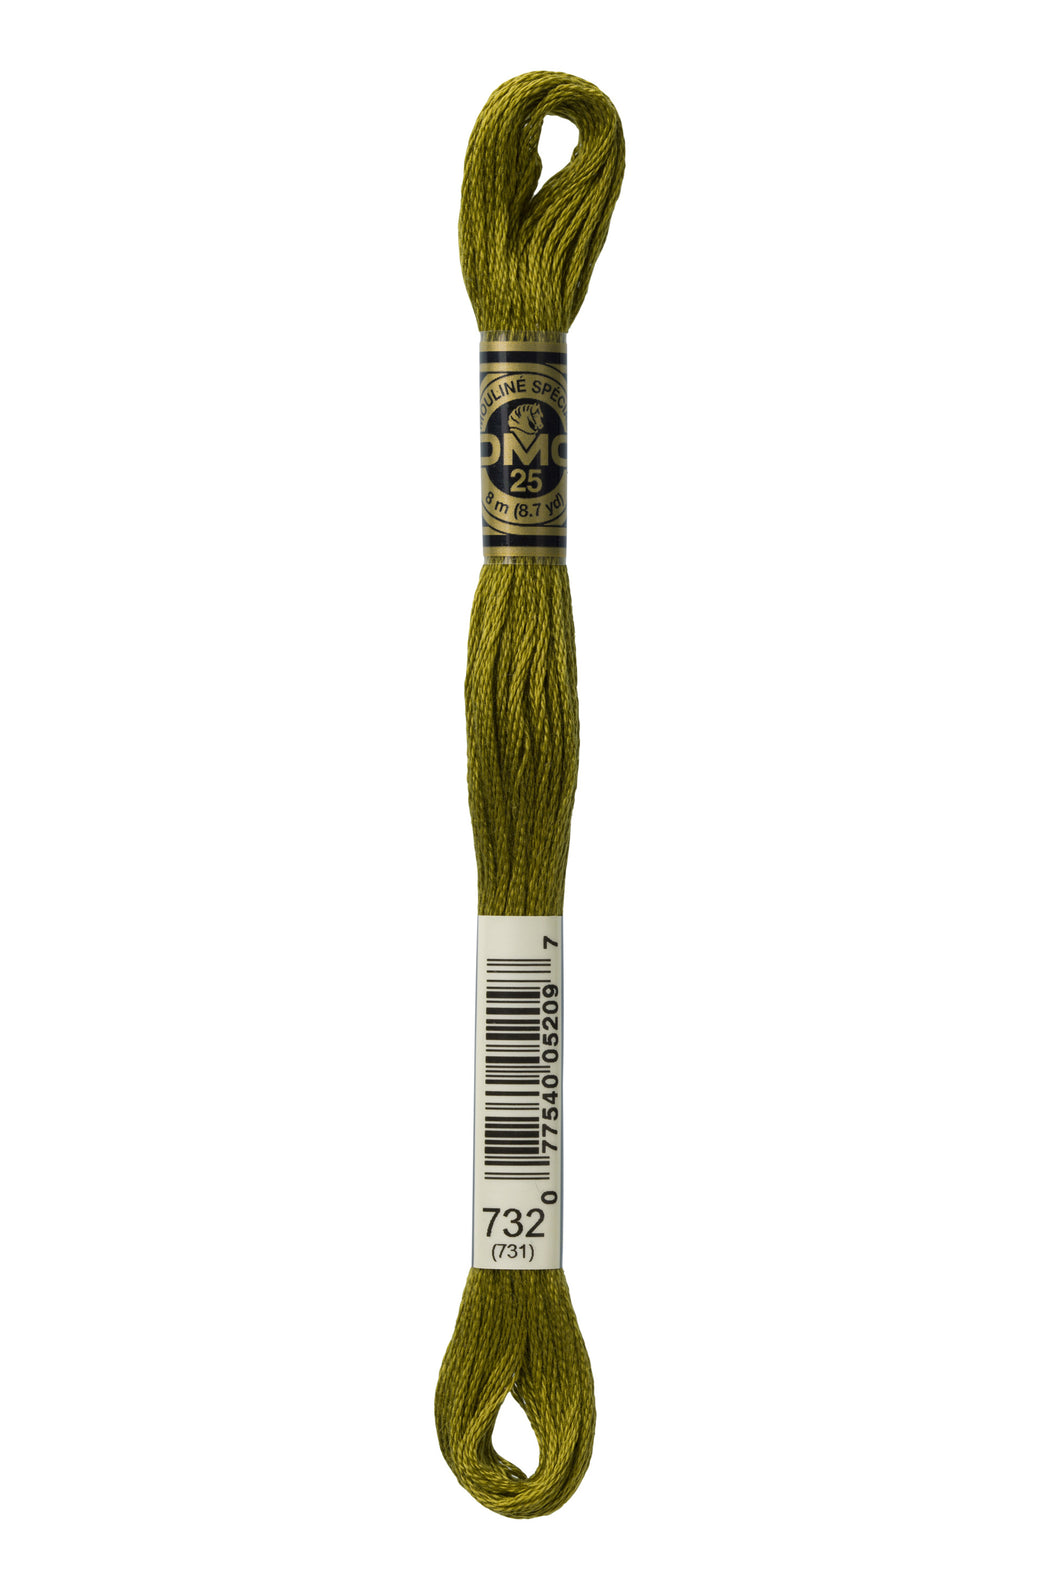 DMC 732 Olive Green 6-Strand Embroidery Floss